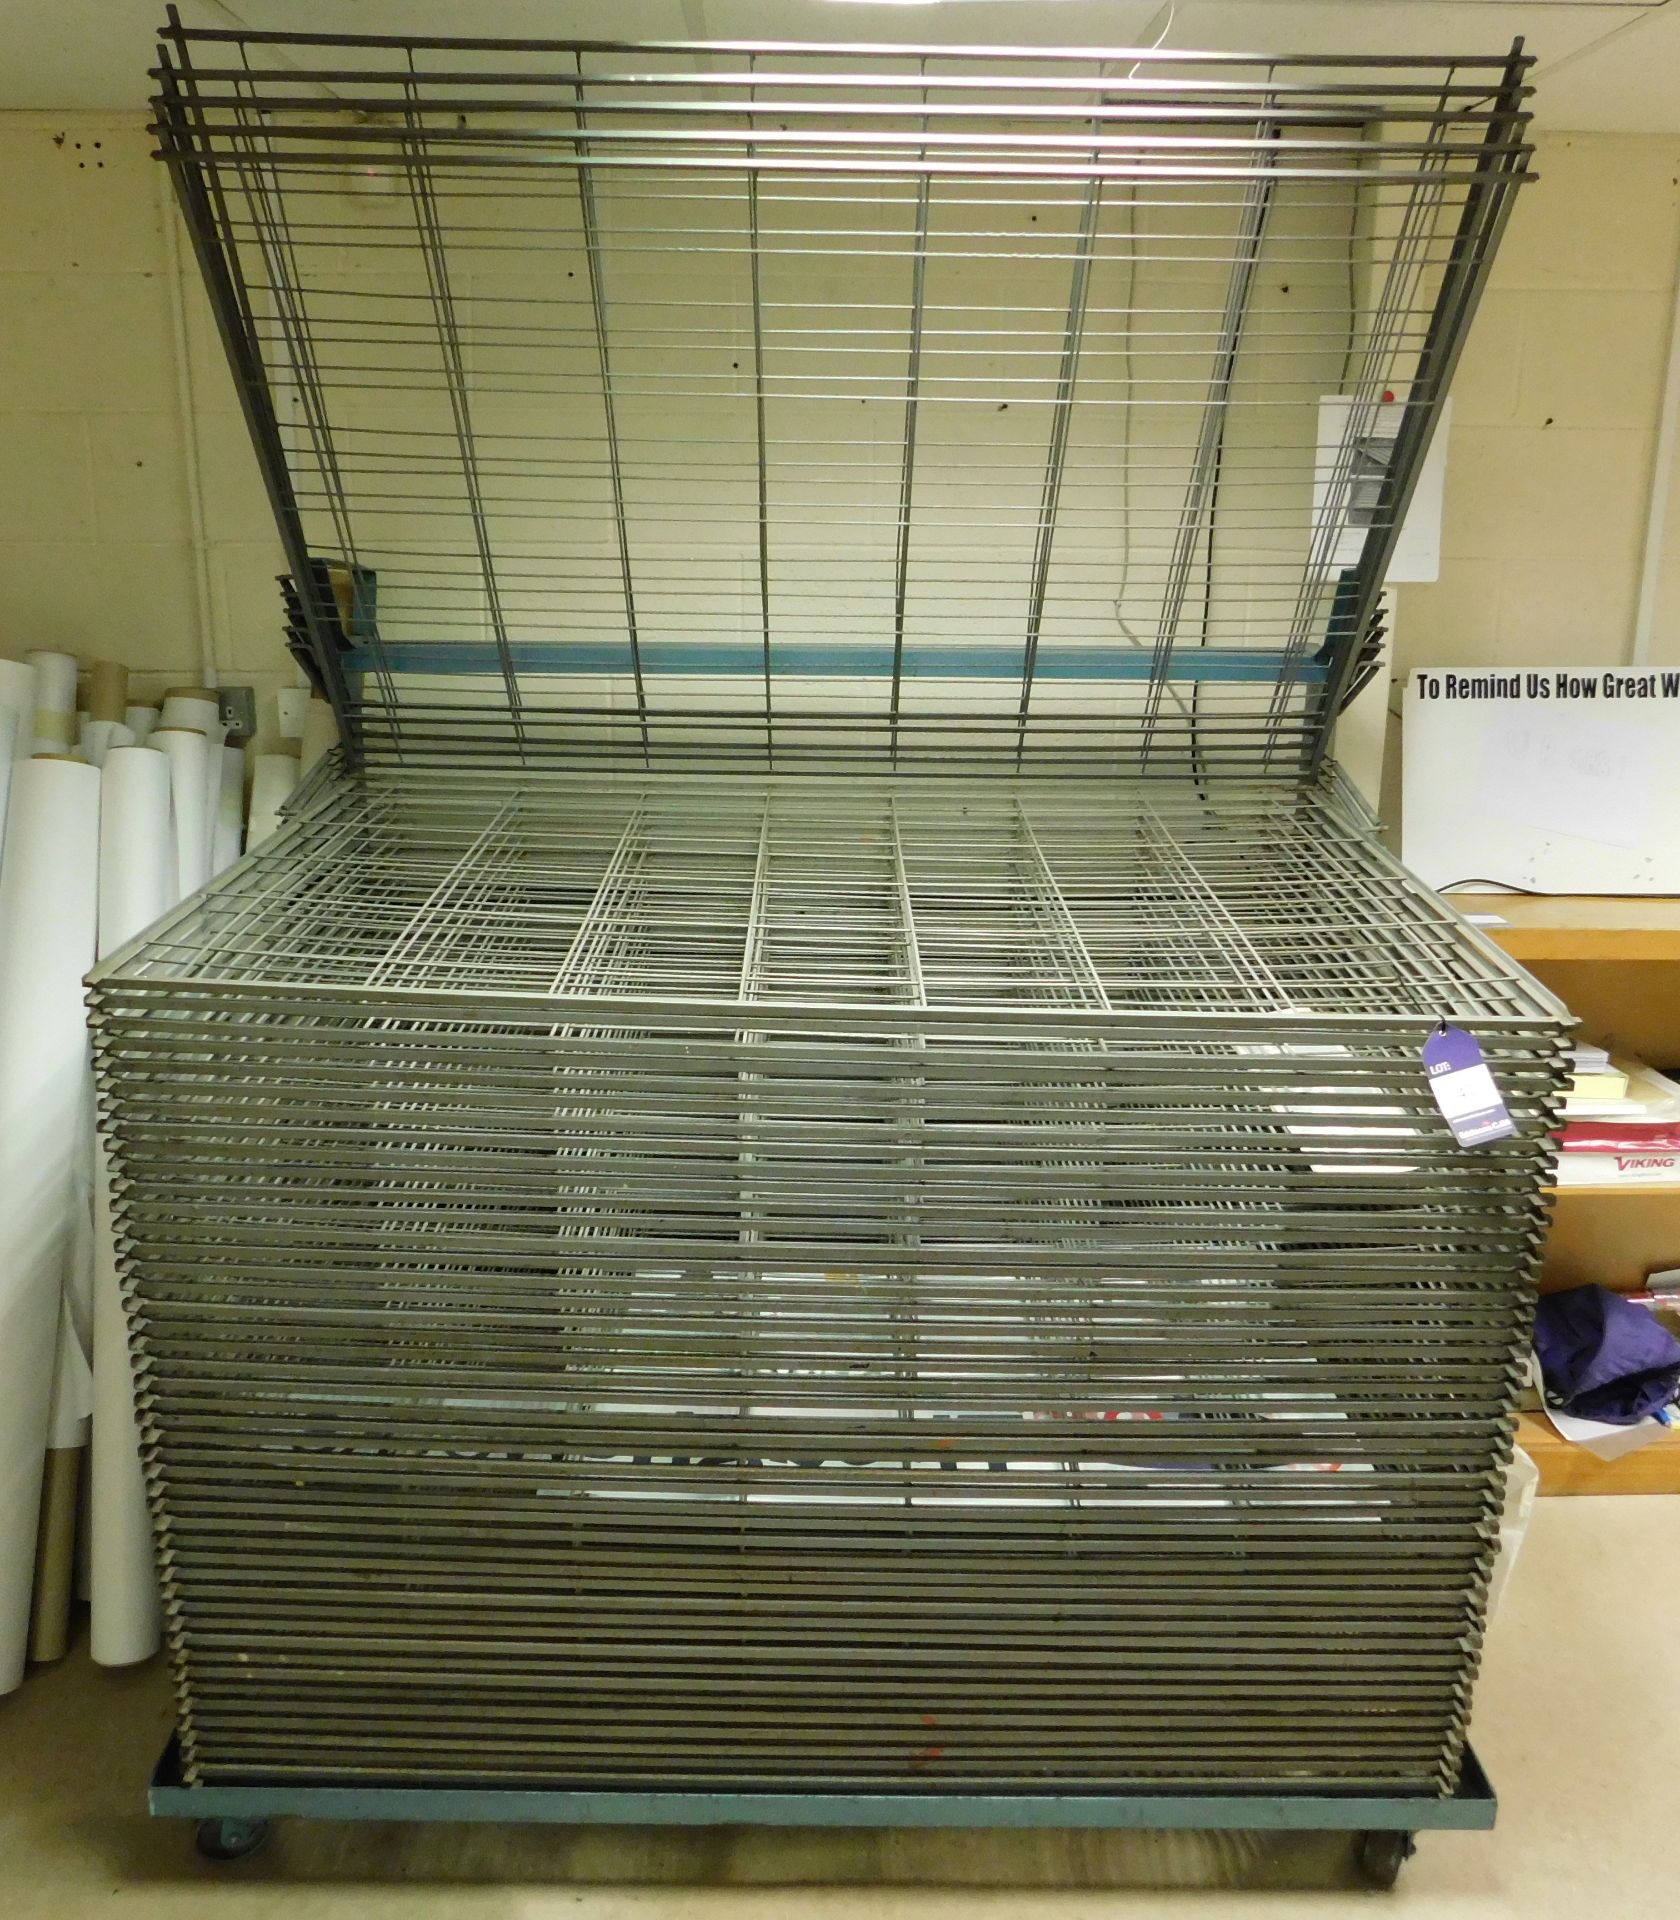 Mobile spring leaf drying rack, approximately 1.6m x 1m